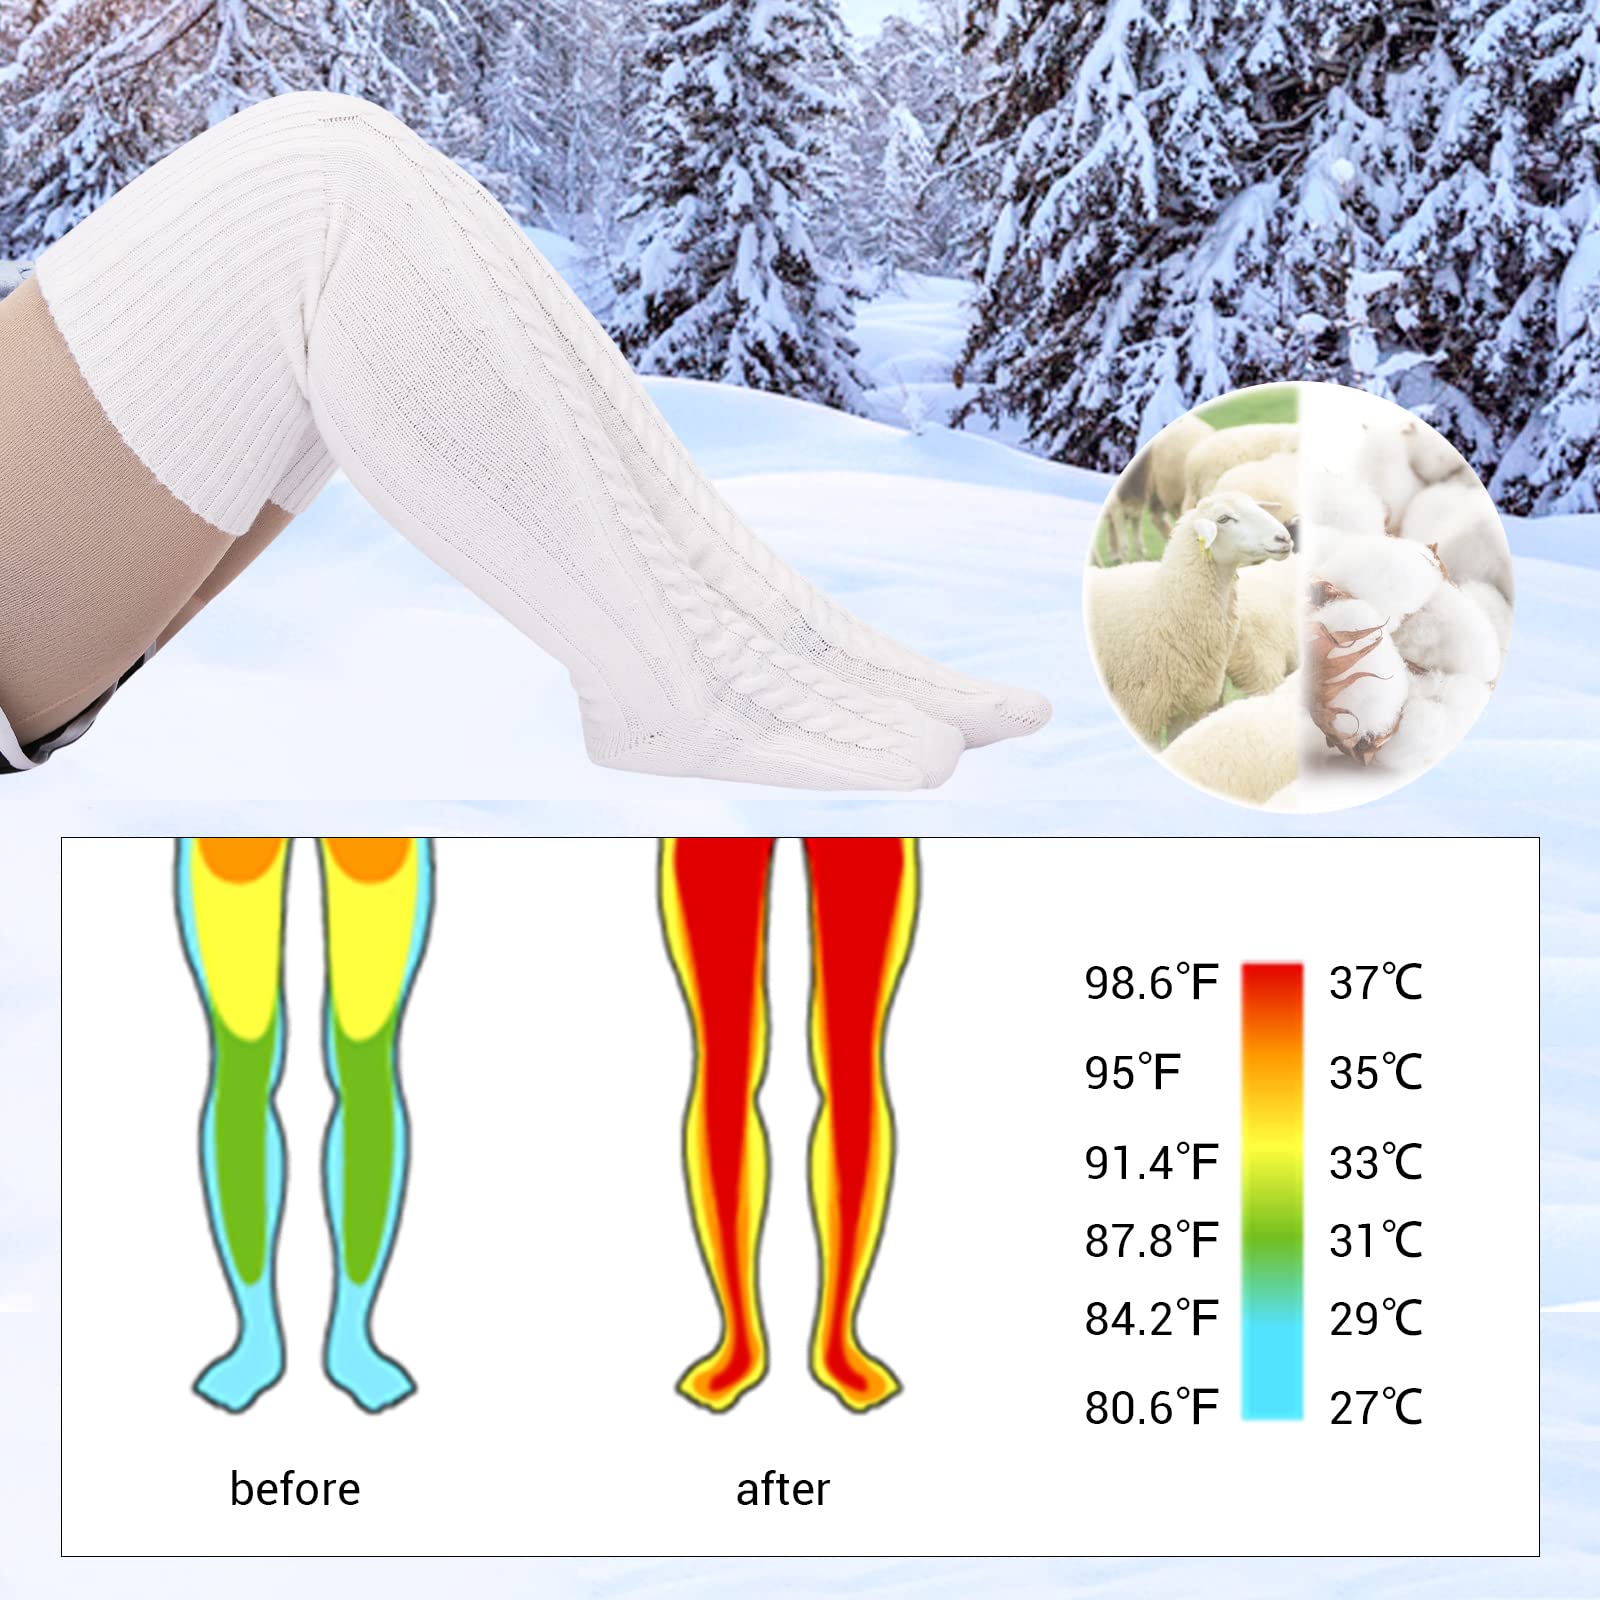 Wool Plus Size Thigh High Socks For Thick Thighs-White - Moon Wood